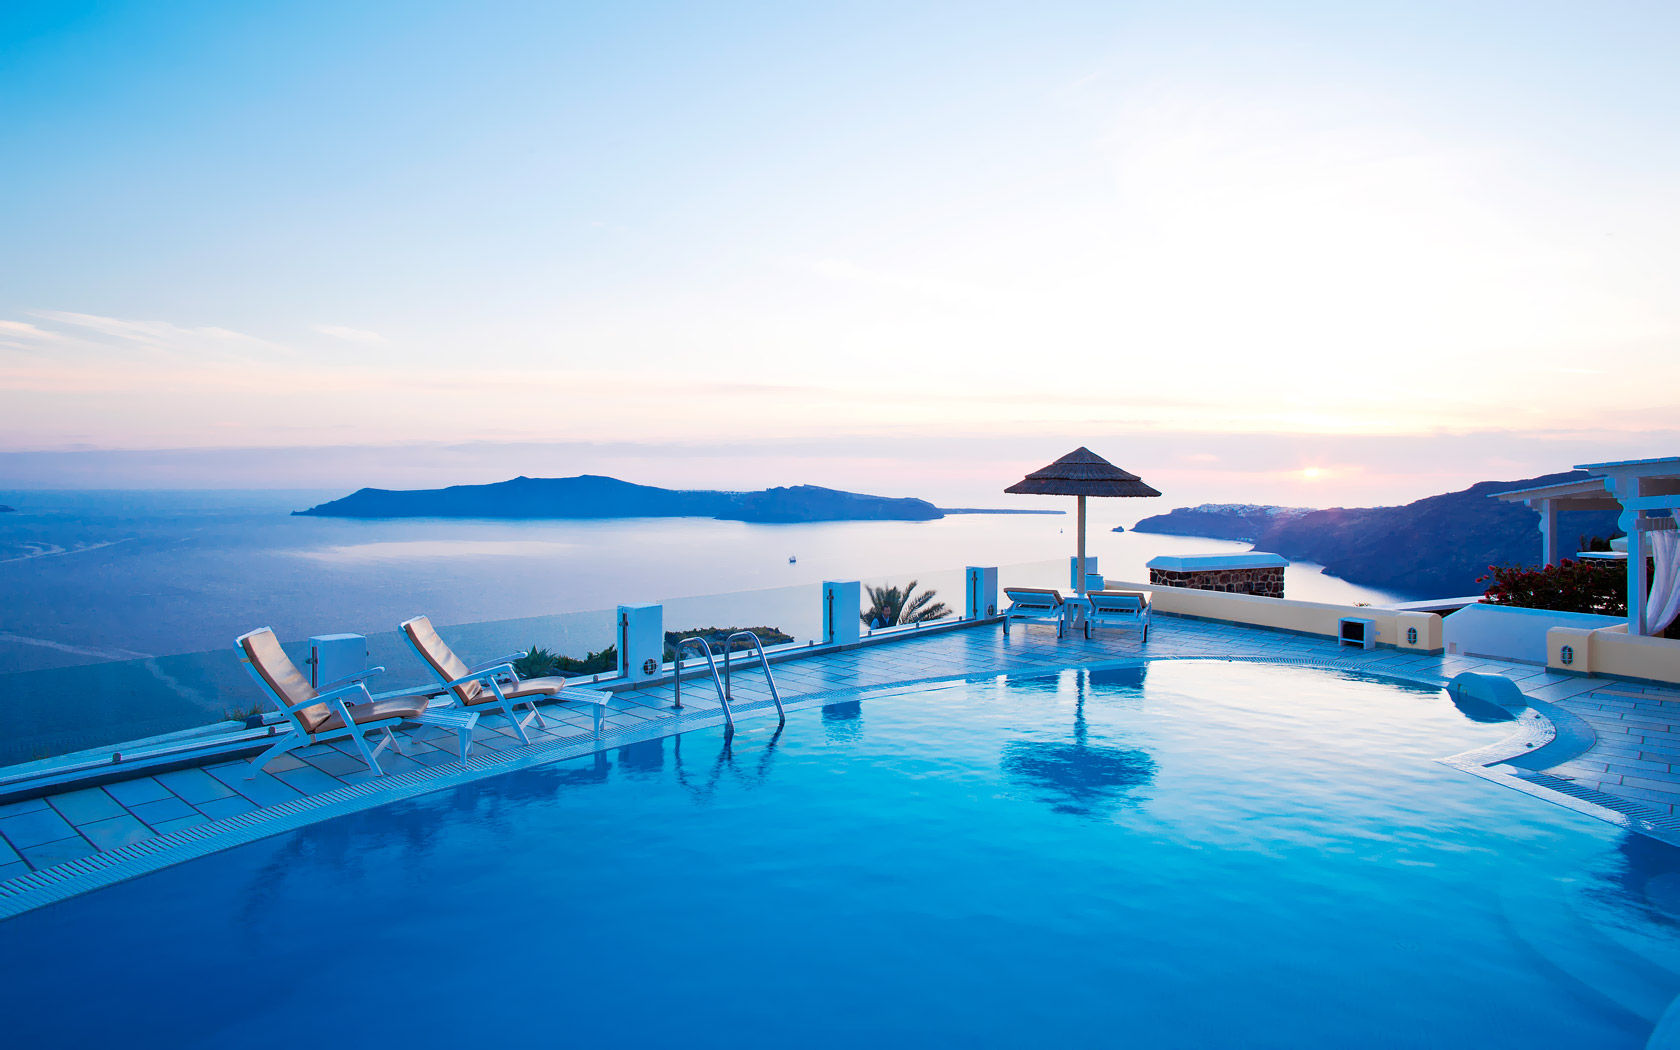 5 Things Not To Miss In Santorini - Luxury Guide To This Beautiful